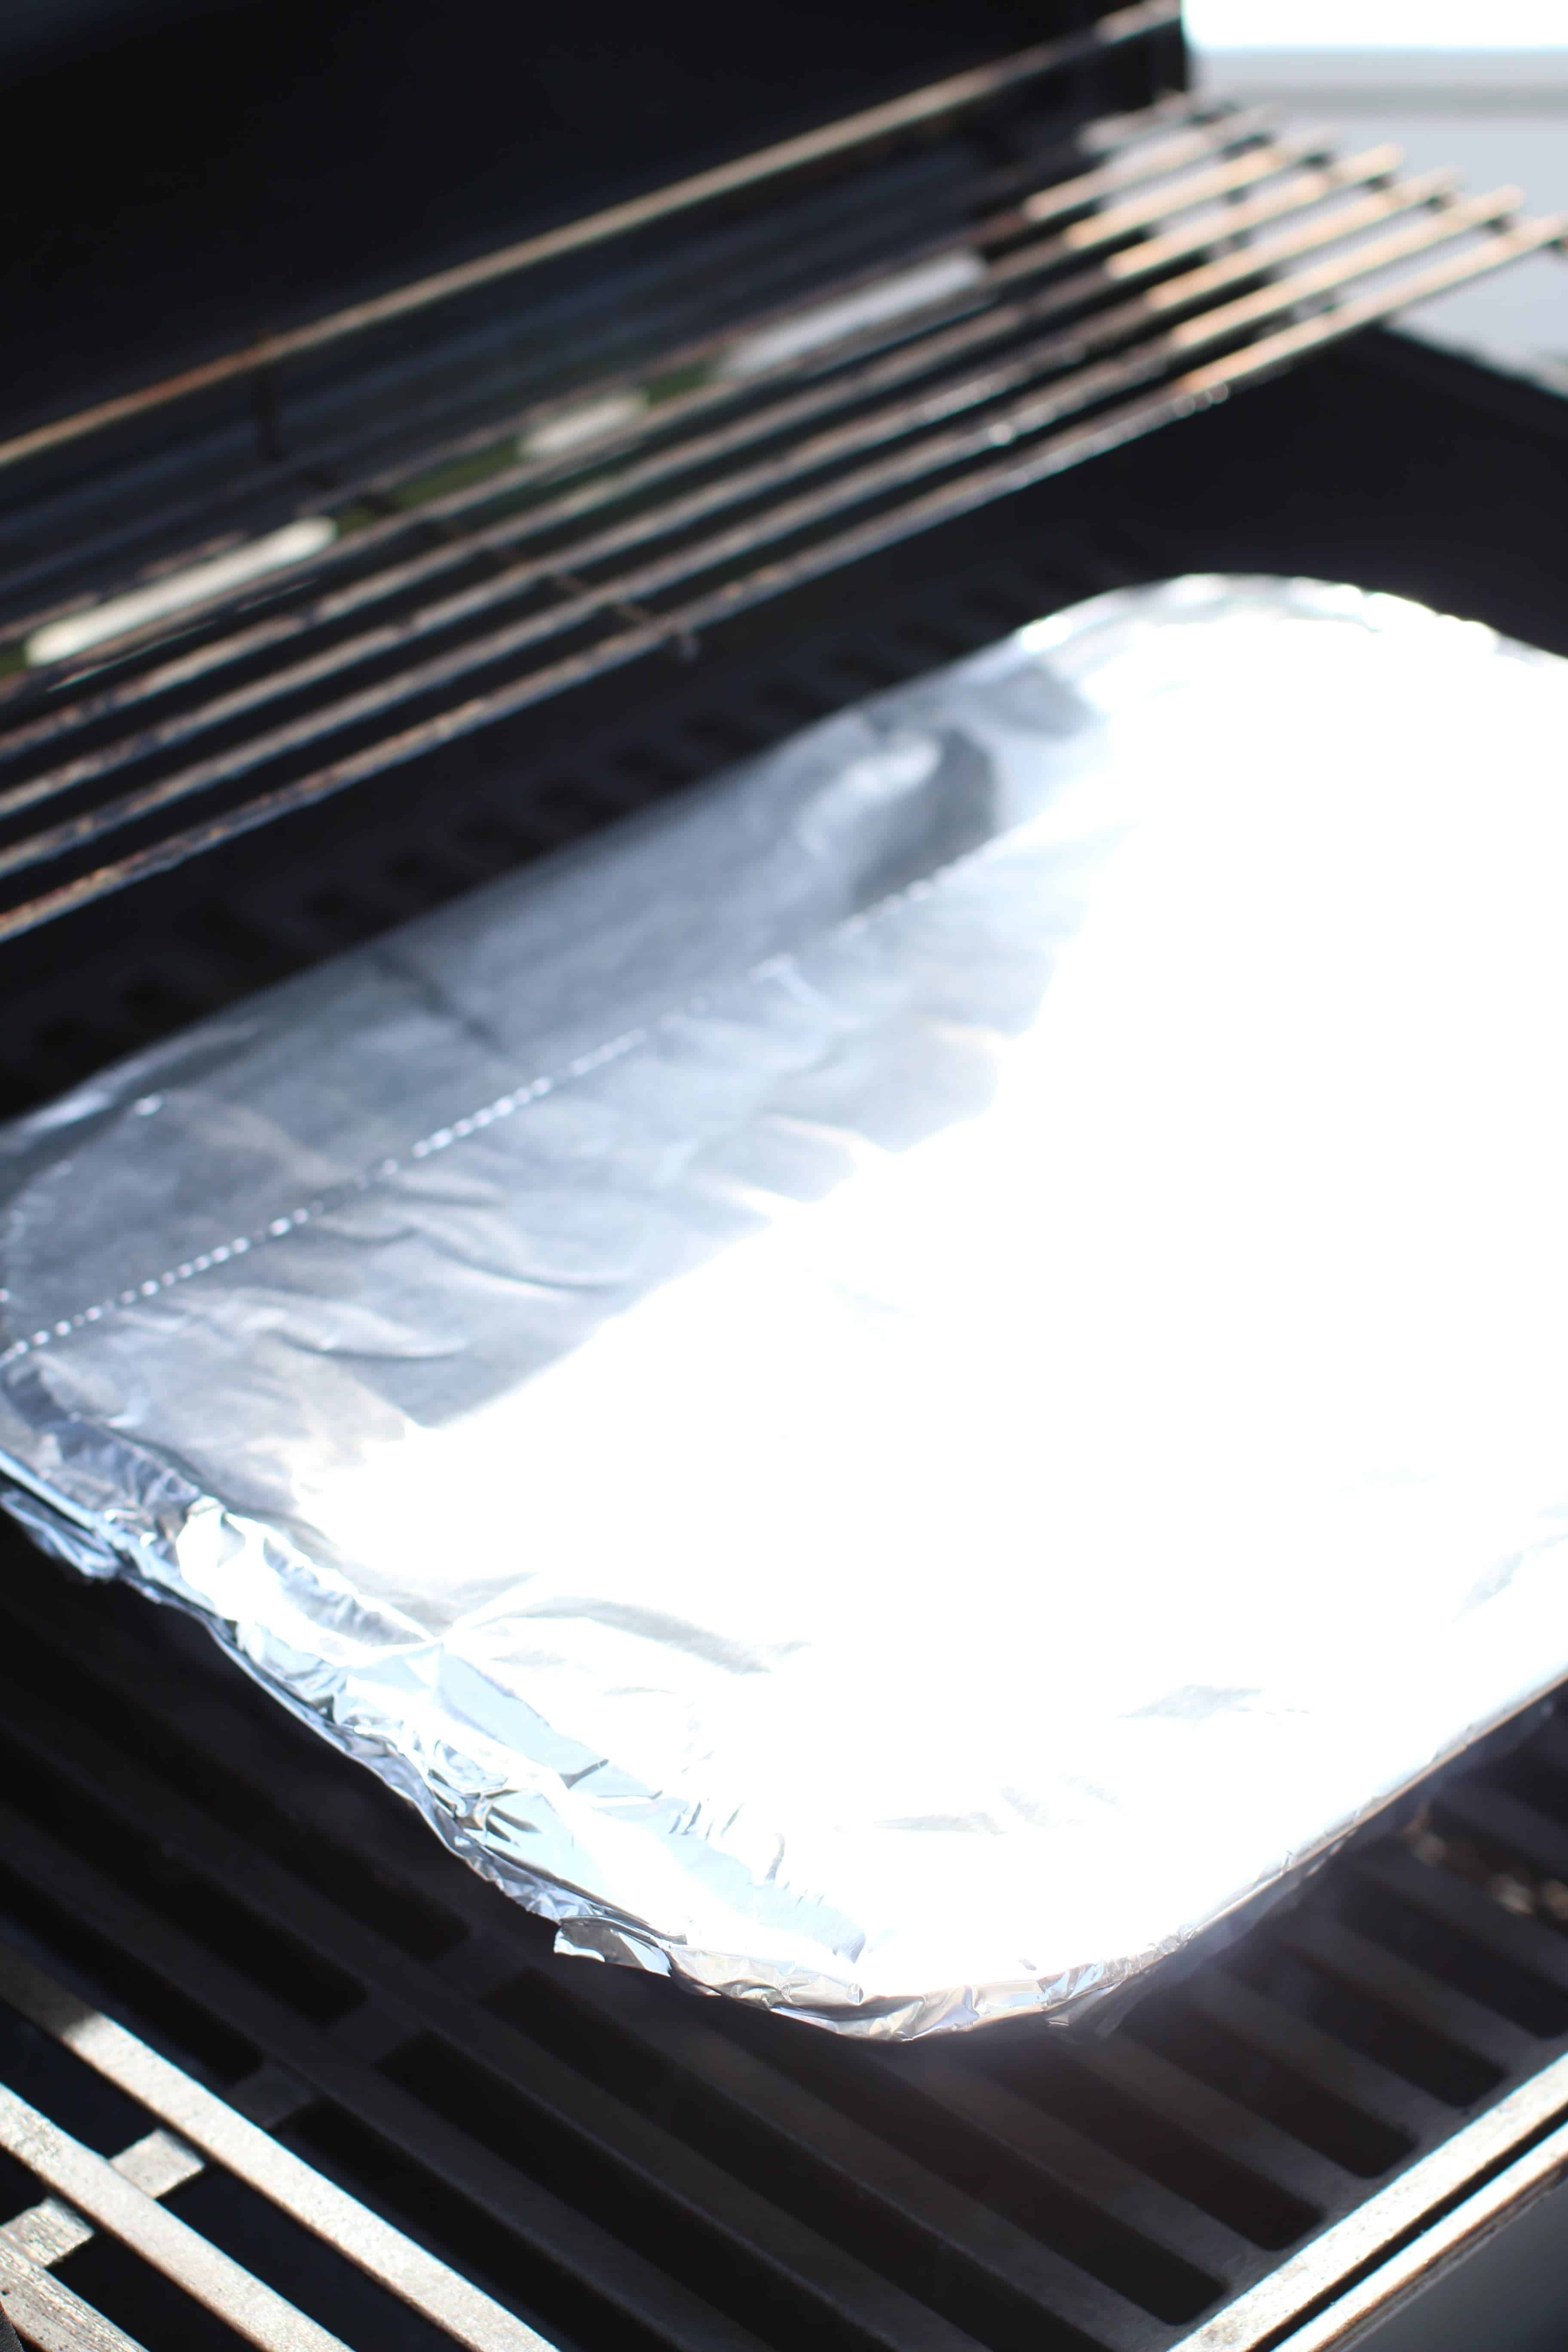 A covered aluminum foil pan on the grate of a gas grill